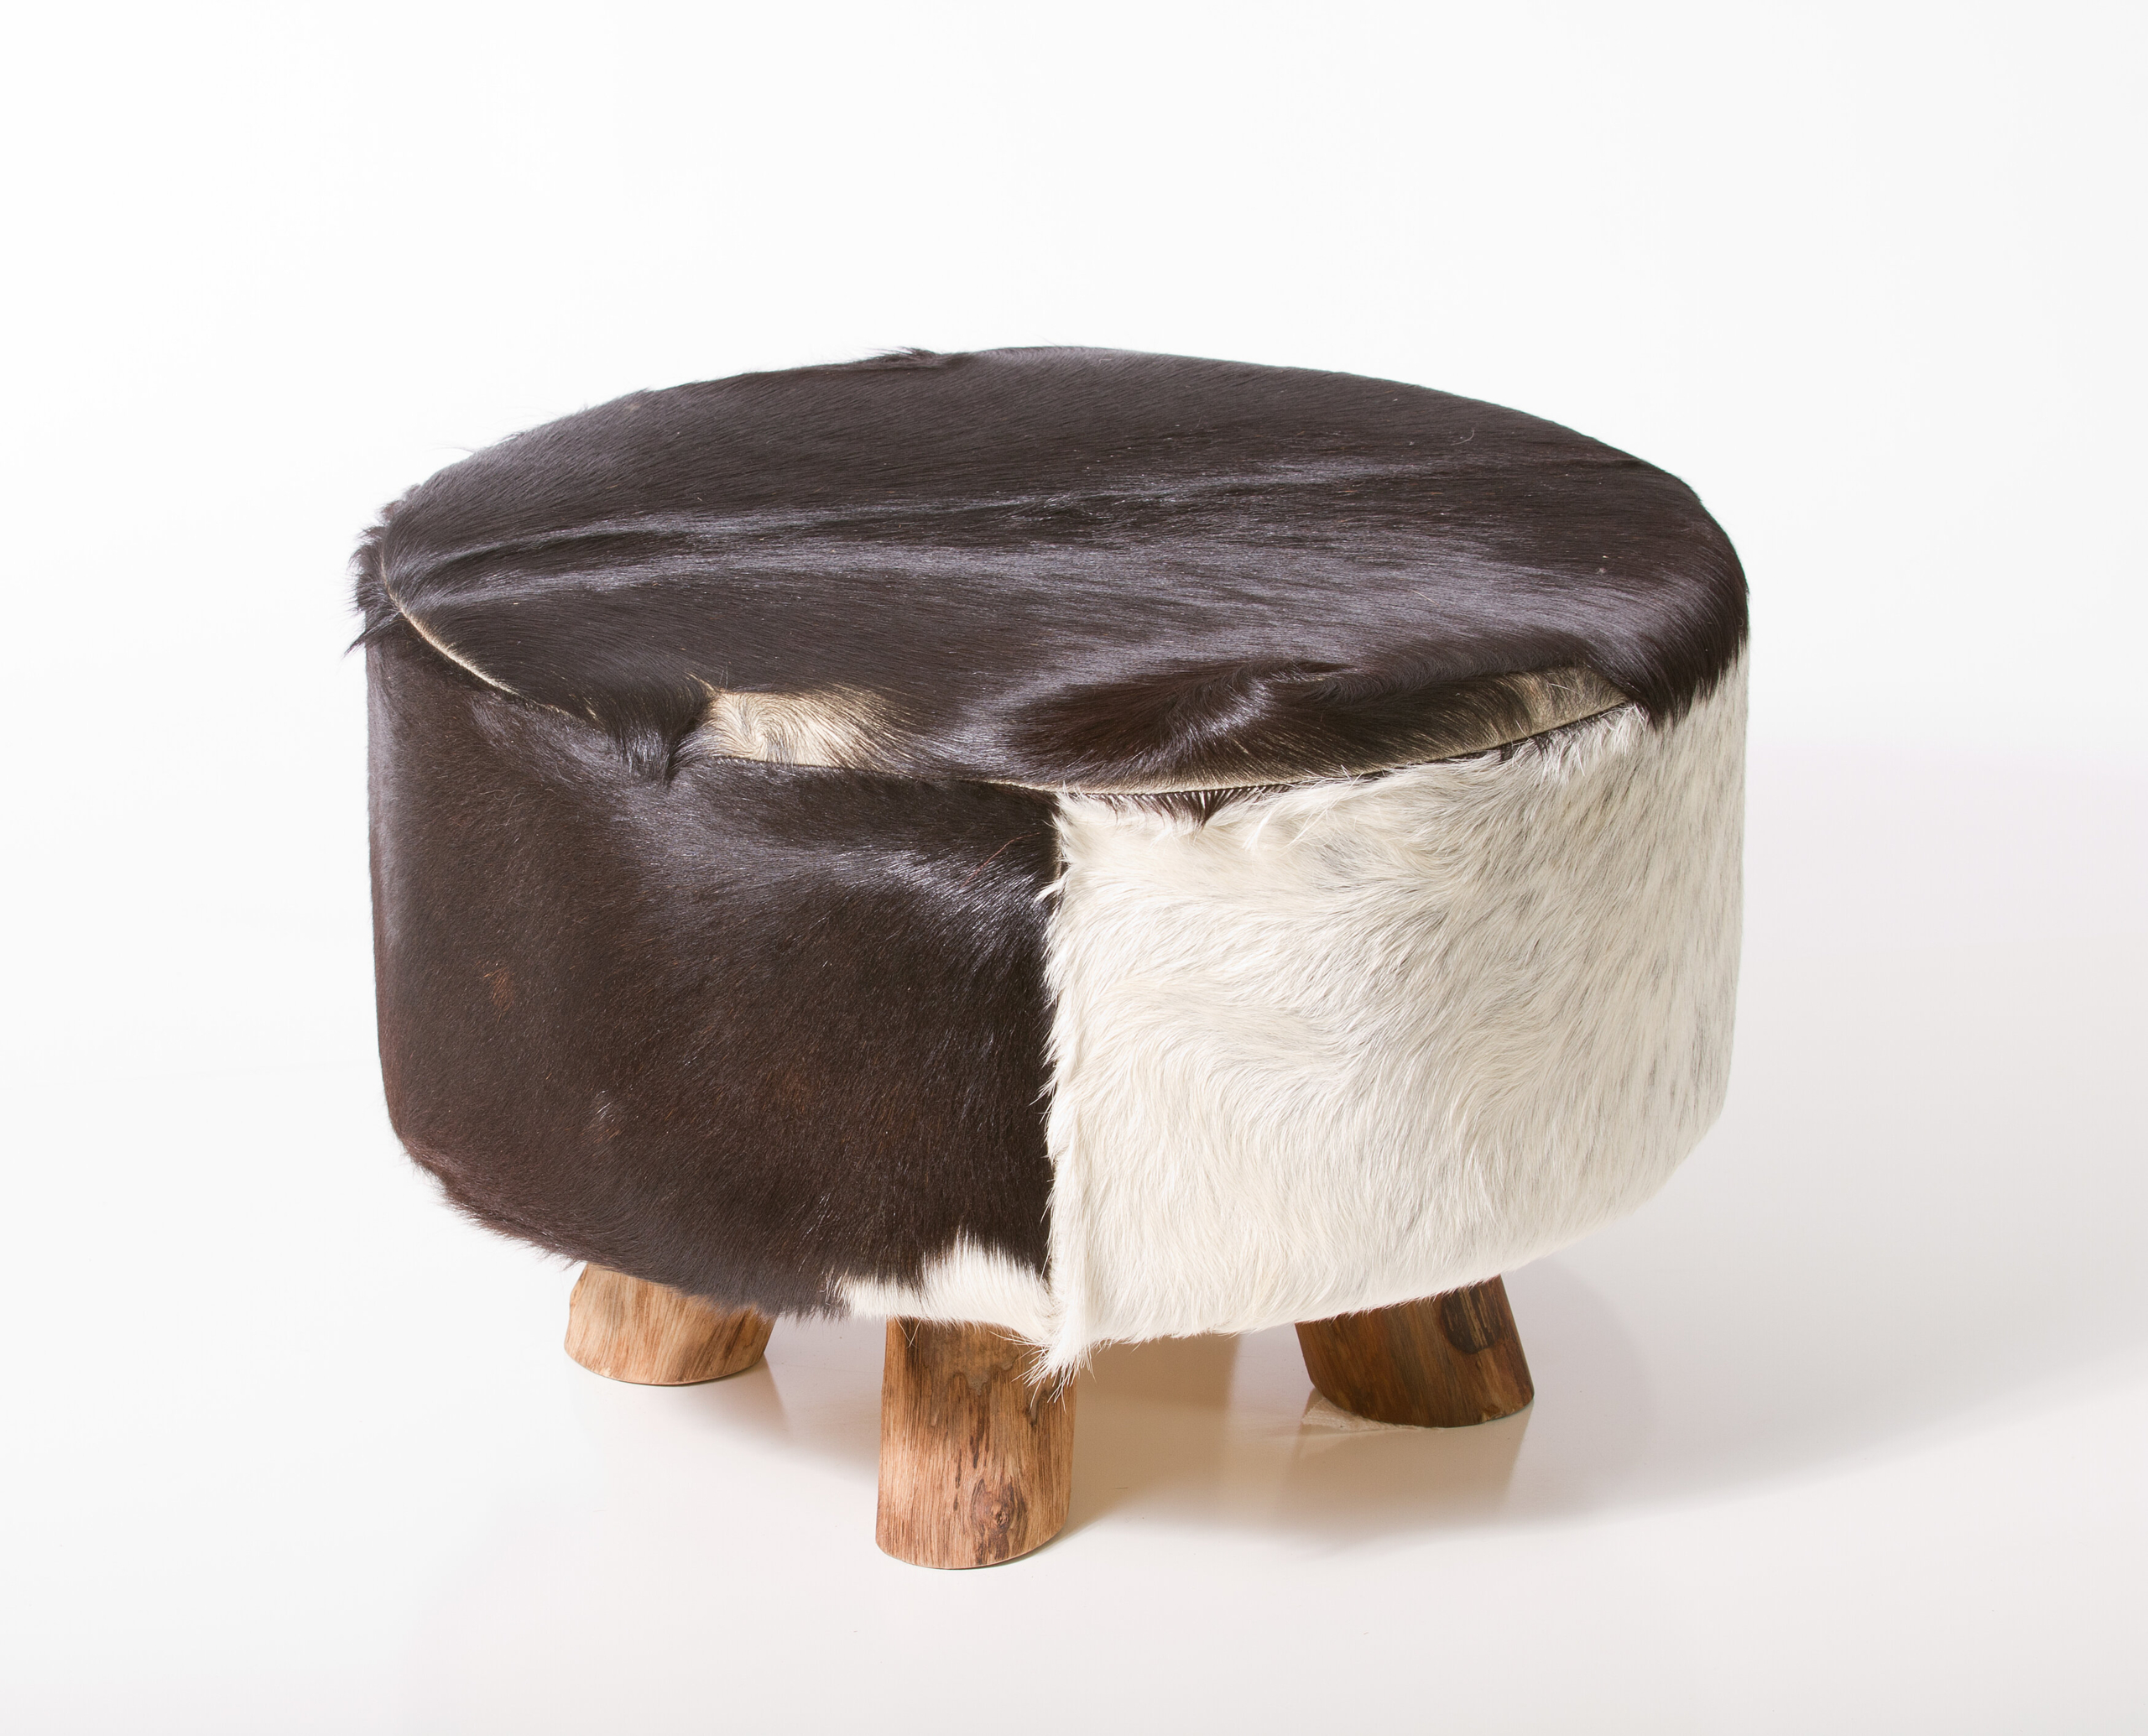 Bare Decor Large Round Leather, Cowhide Ottoman in Black and White